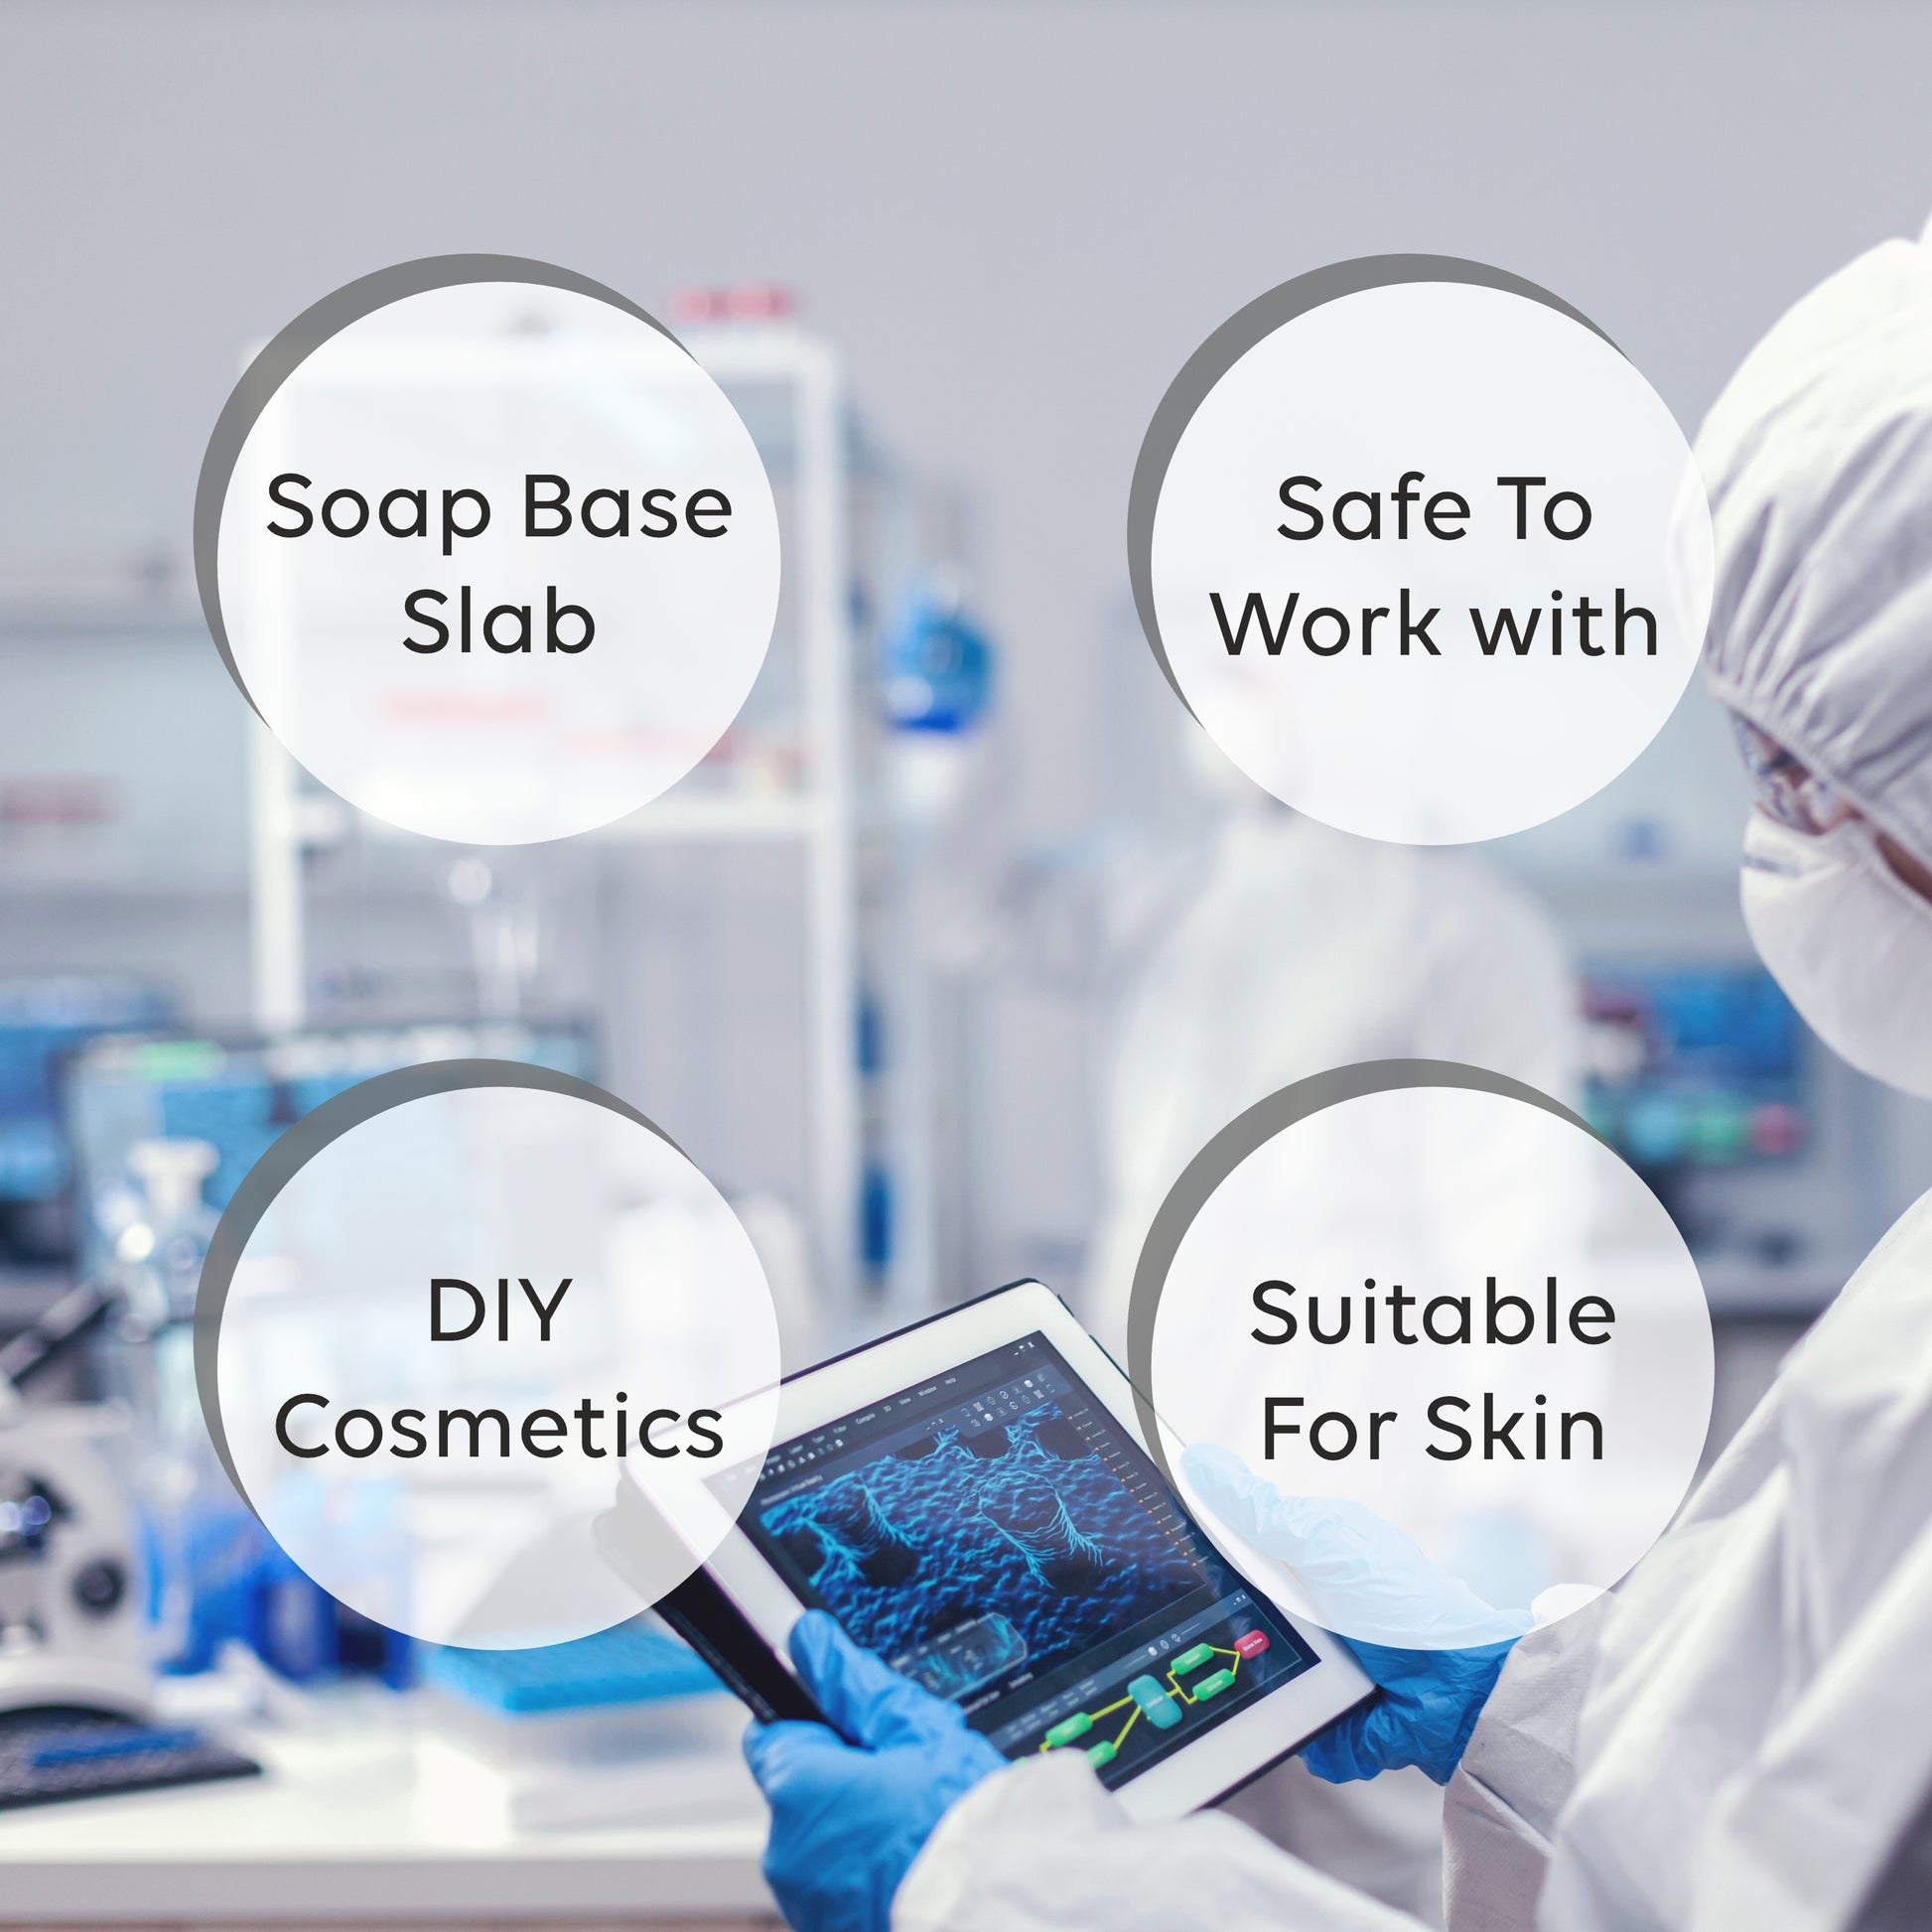 cosmeticmaking, saopmaking, cosmeticmakingingredients, soapmakingingredients,cosmeticingredients,naturalingredients,organicingredients,veganingredients, essentialoils,fragranceoils,carrieroils, carrieroils, butters, clays,botanicals,herbs,preservatives,emulsifiers,surfa ctants,thickeners, thickeners,exfoliants, goat milk soap base